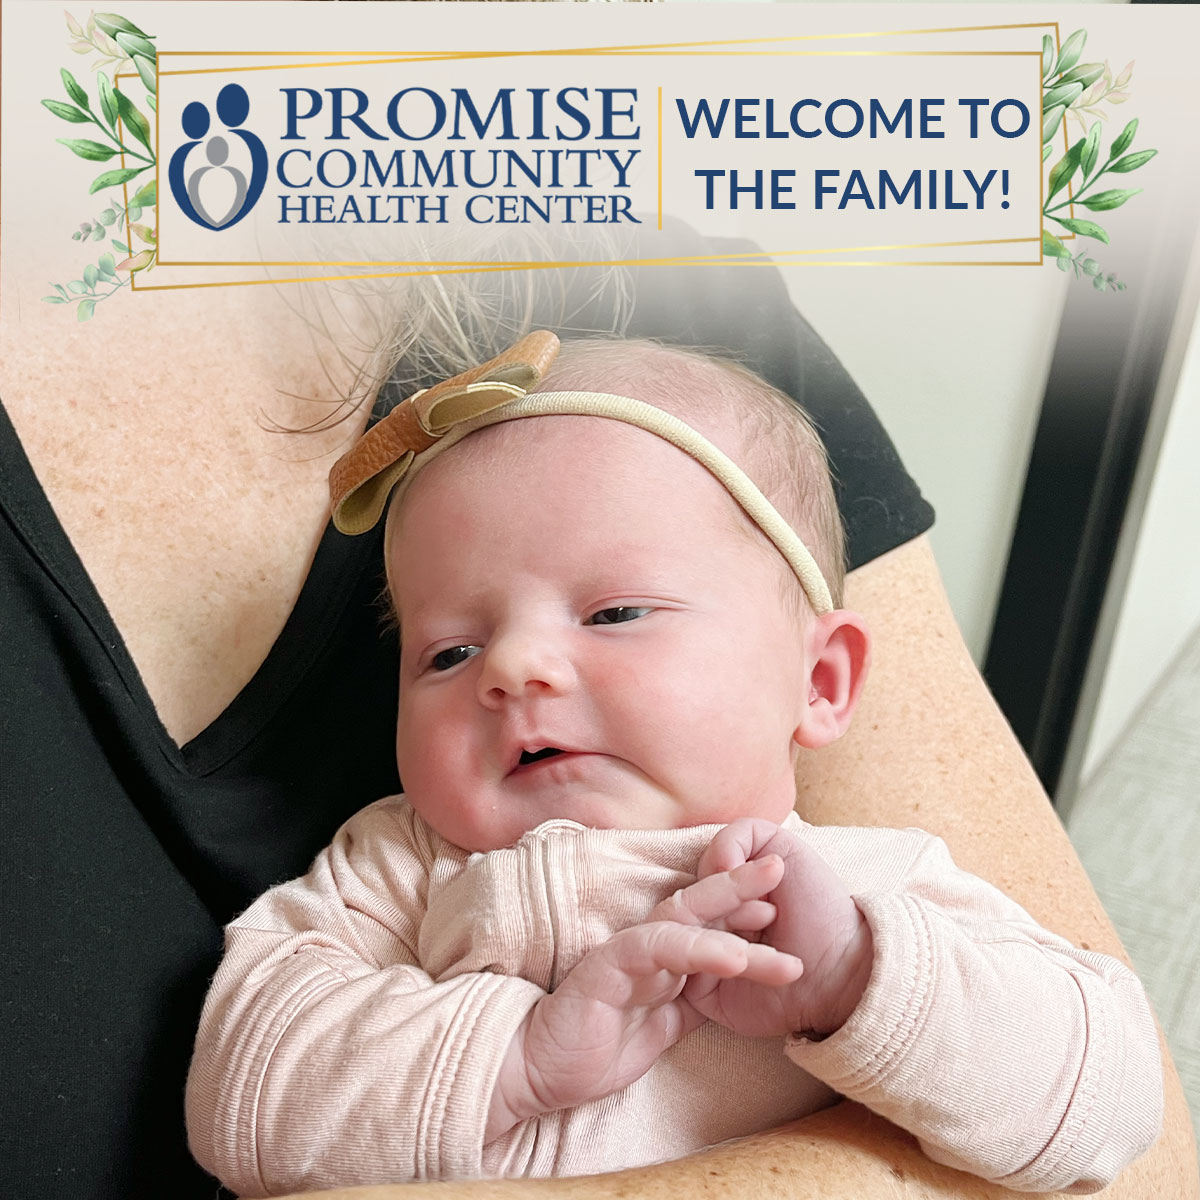 Home birth in Rock Valley, Iowa | Promise Community Health Center in Sioux Center, Iowa | Midwives in northwest Iowa, Midwives in southeast South Dakota, Midwives in southwest Minnesota | Midwives in Sioux Falls South Dakota, Midwives in Beresford South Dakota, Midwives in Sioux City IA, Midwives in LeMars IA, Midwives in Worthington MN, Midwives in Iowa, Midwives in South Dakota, Midwives in Minnesota